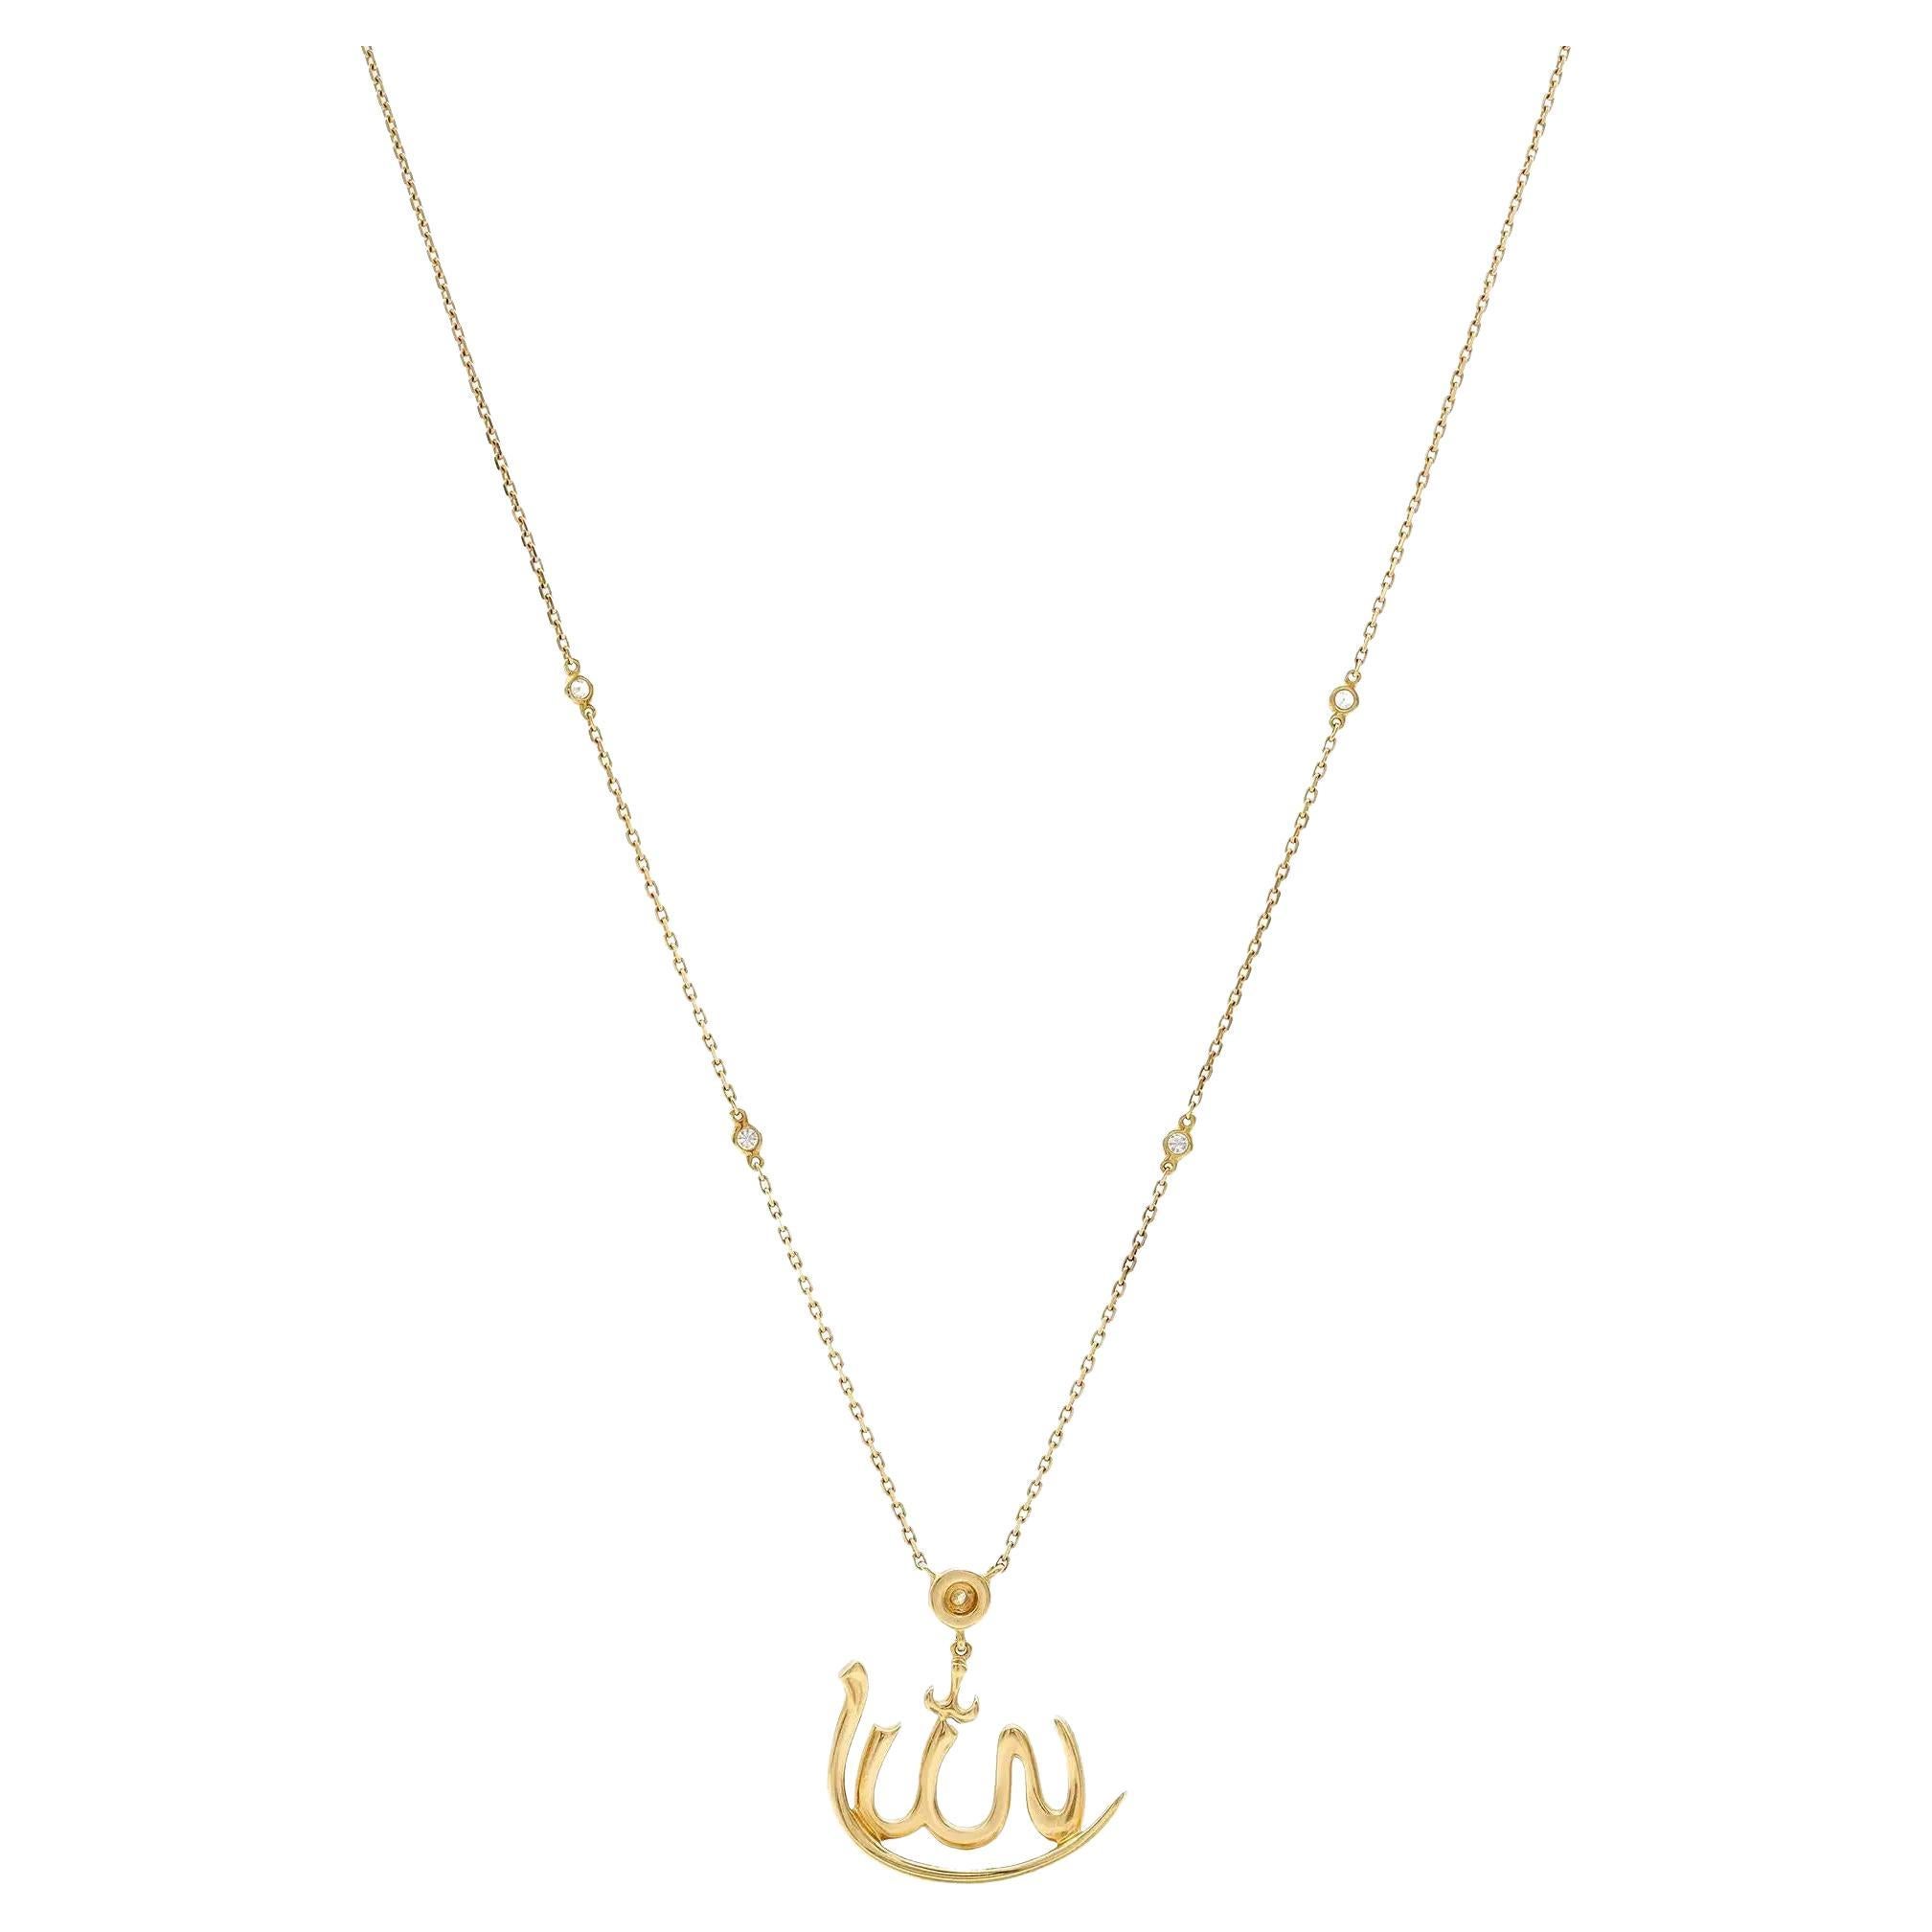 This beautifully crafted Messika Allah faith diamond pendant necklace is adorned with pave set round cut diamonds attached to a prong set shimmering round brilliant cut diamond with a halo setting. Completing the look with diamond by the yard chain.